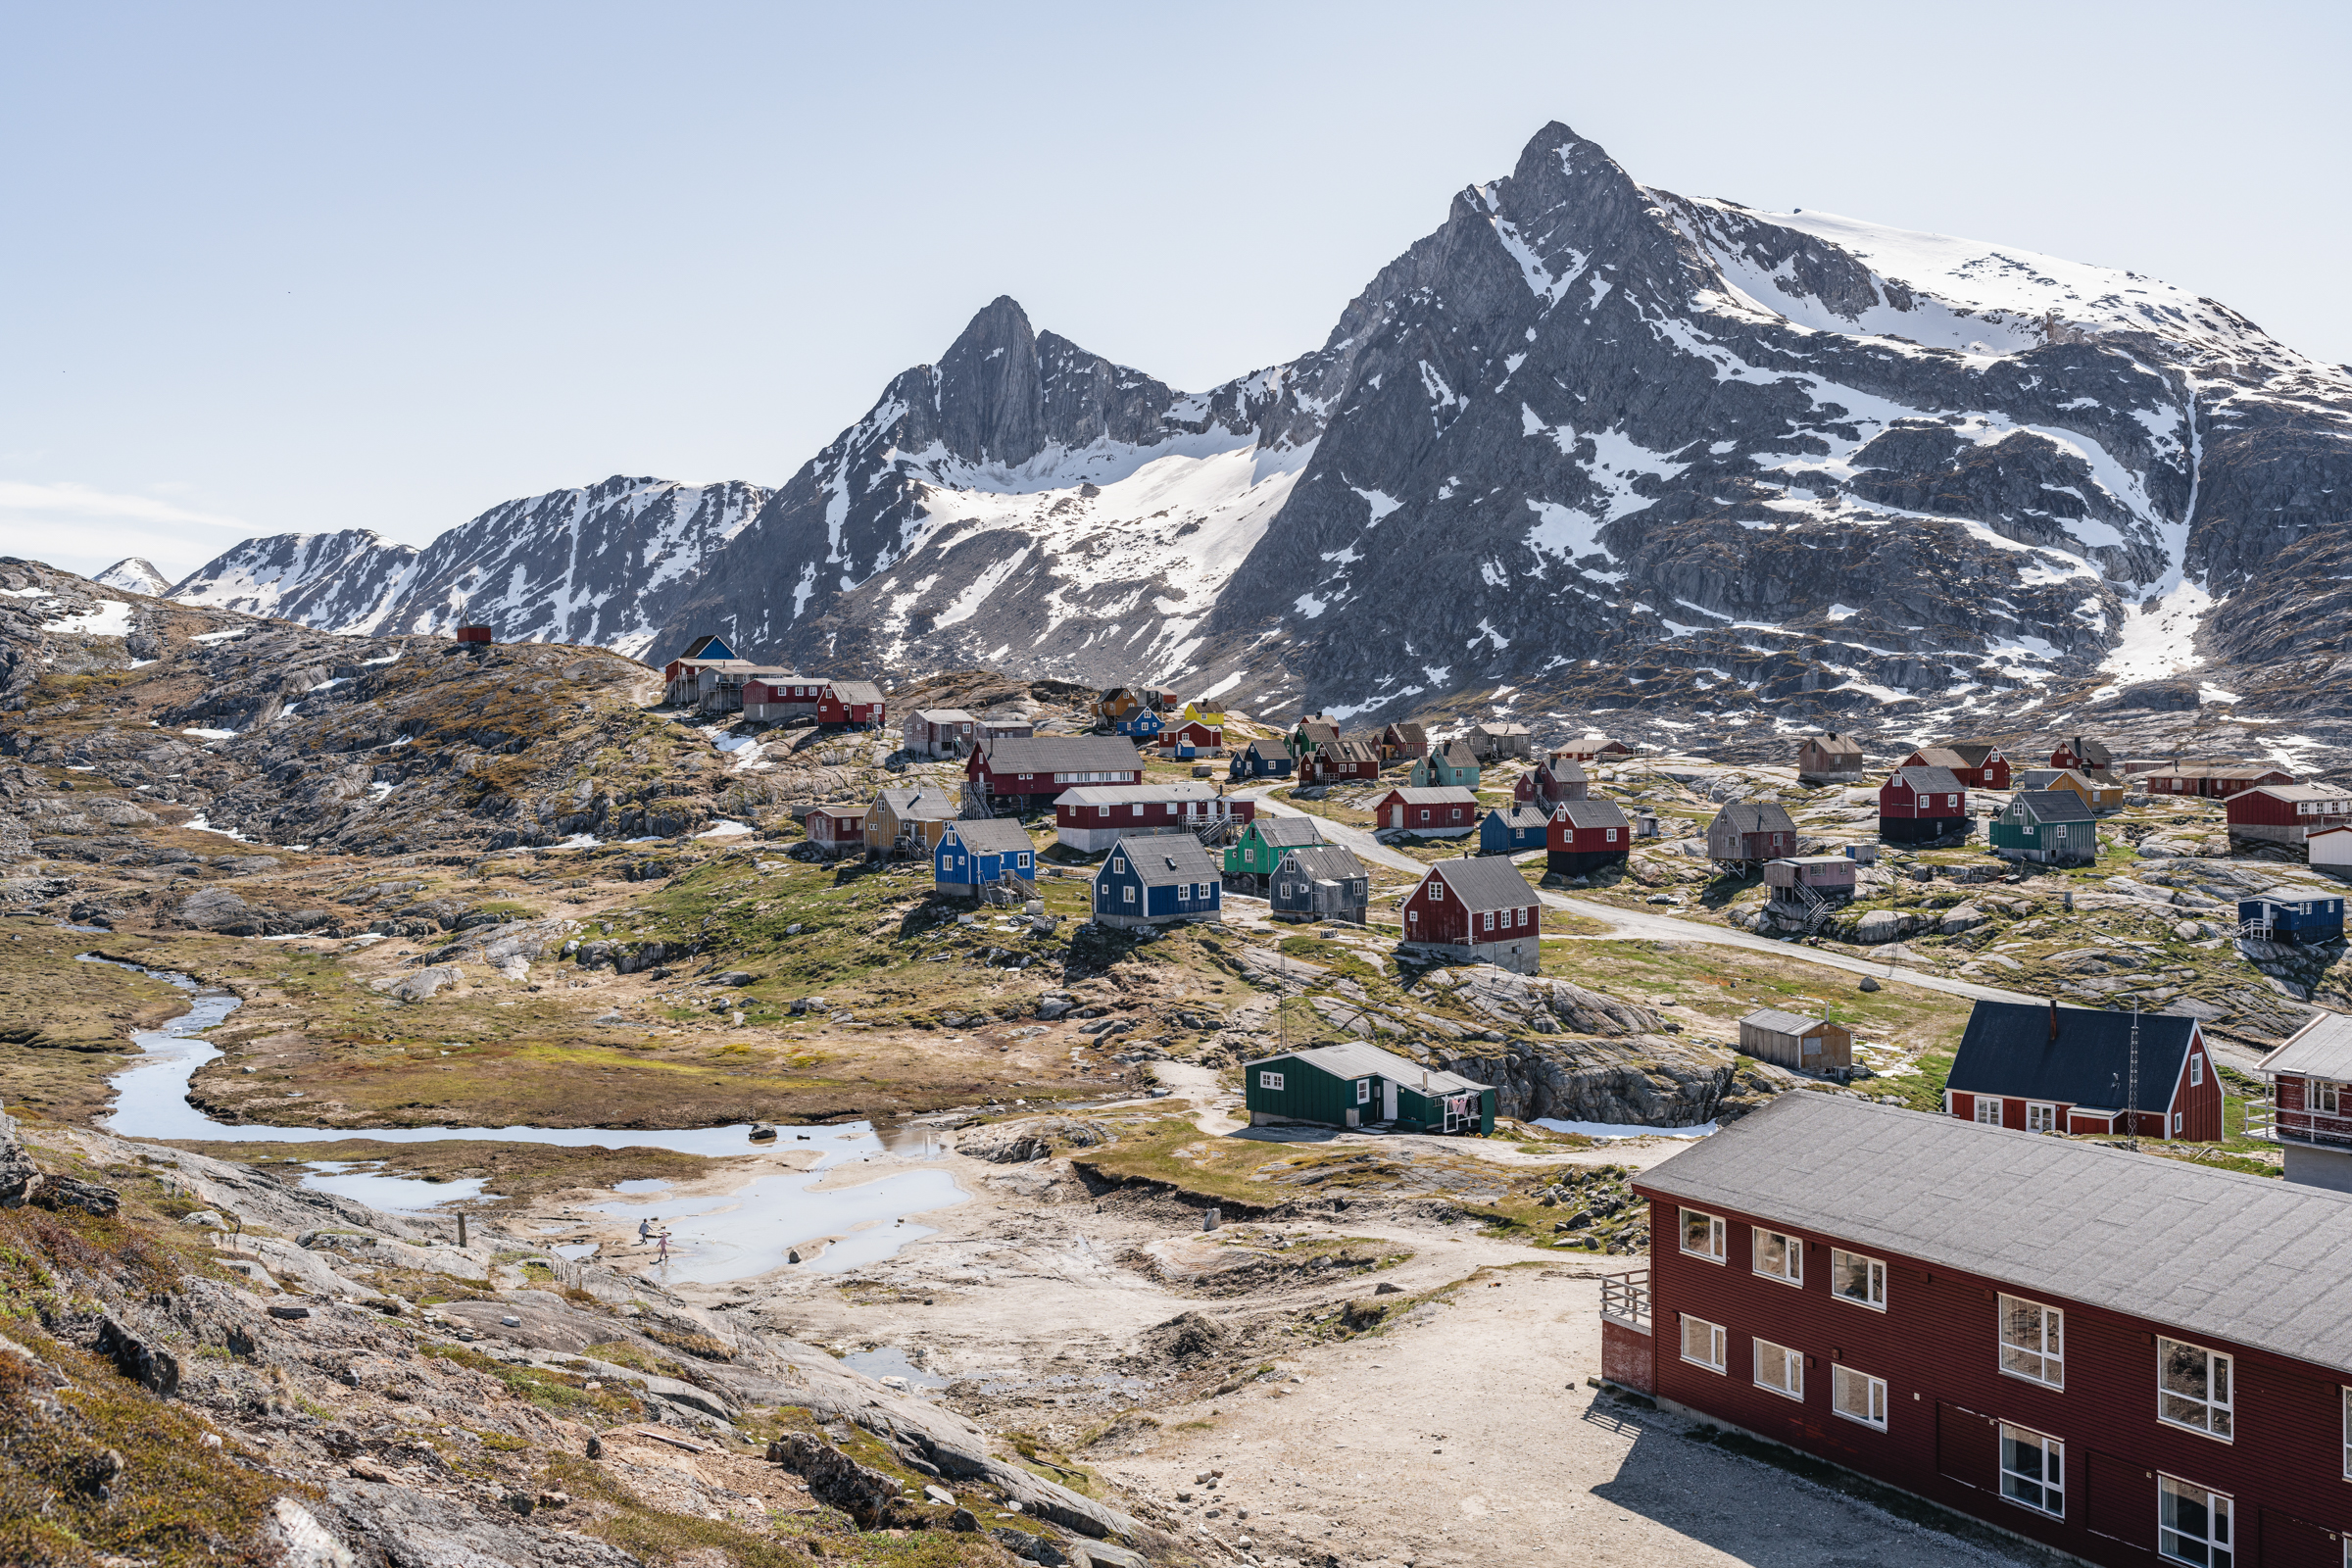 View of Kuummiut and its iconic mountain in the backdrop.